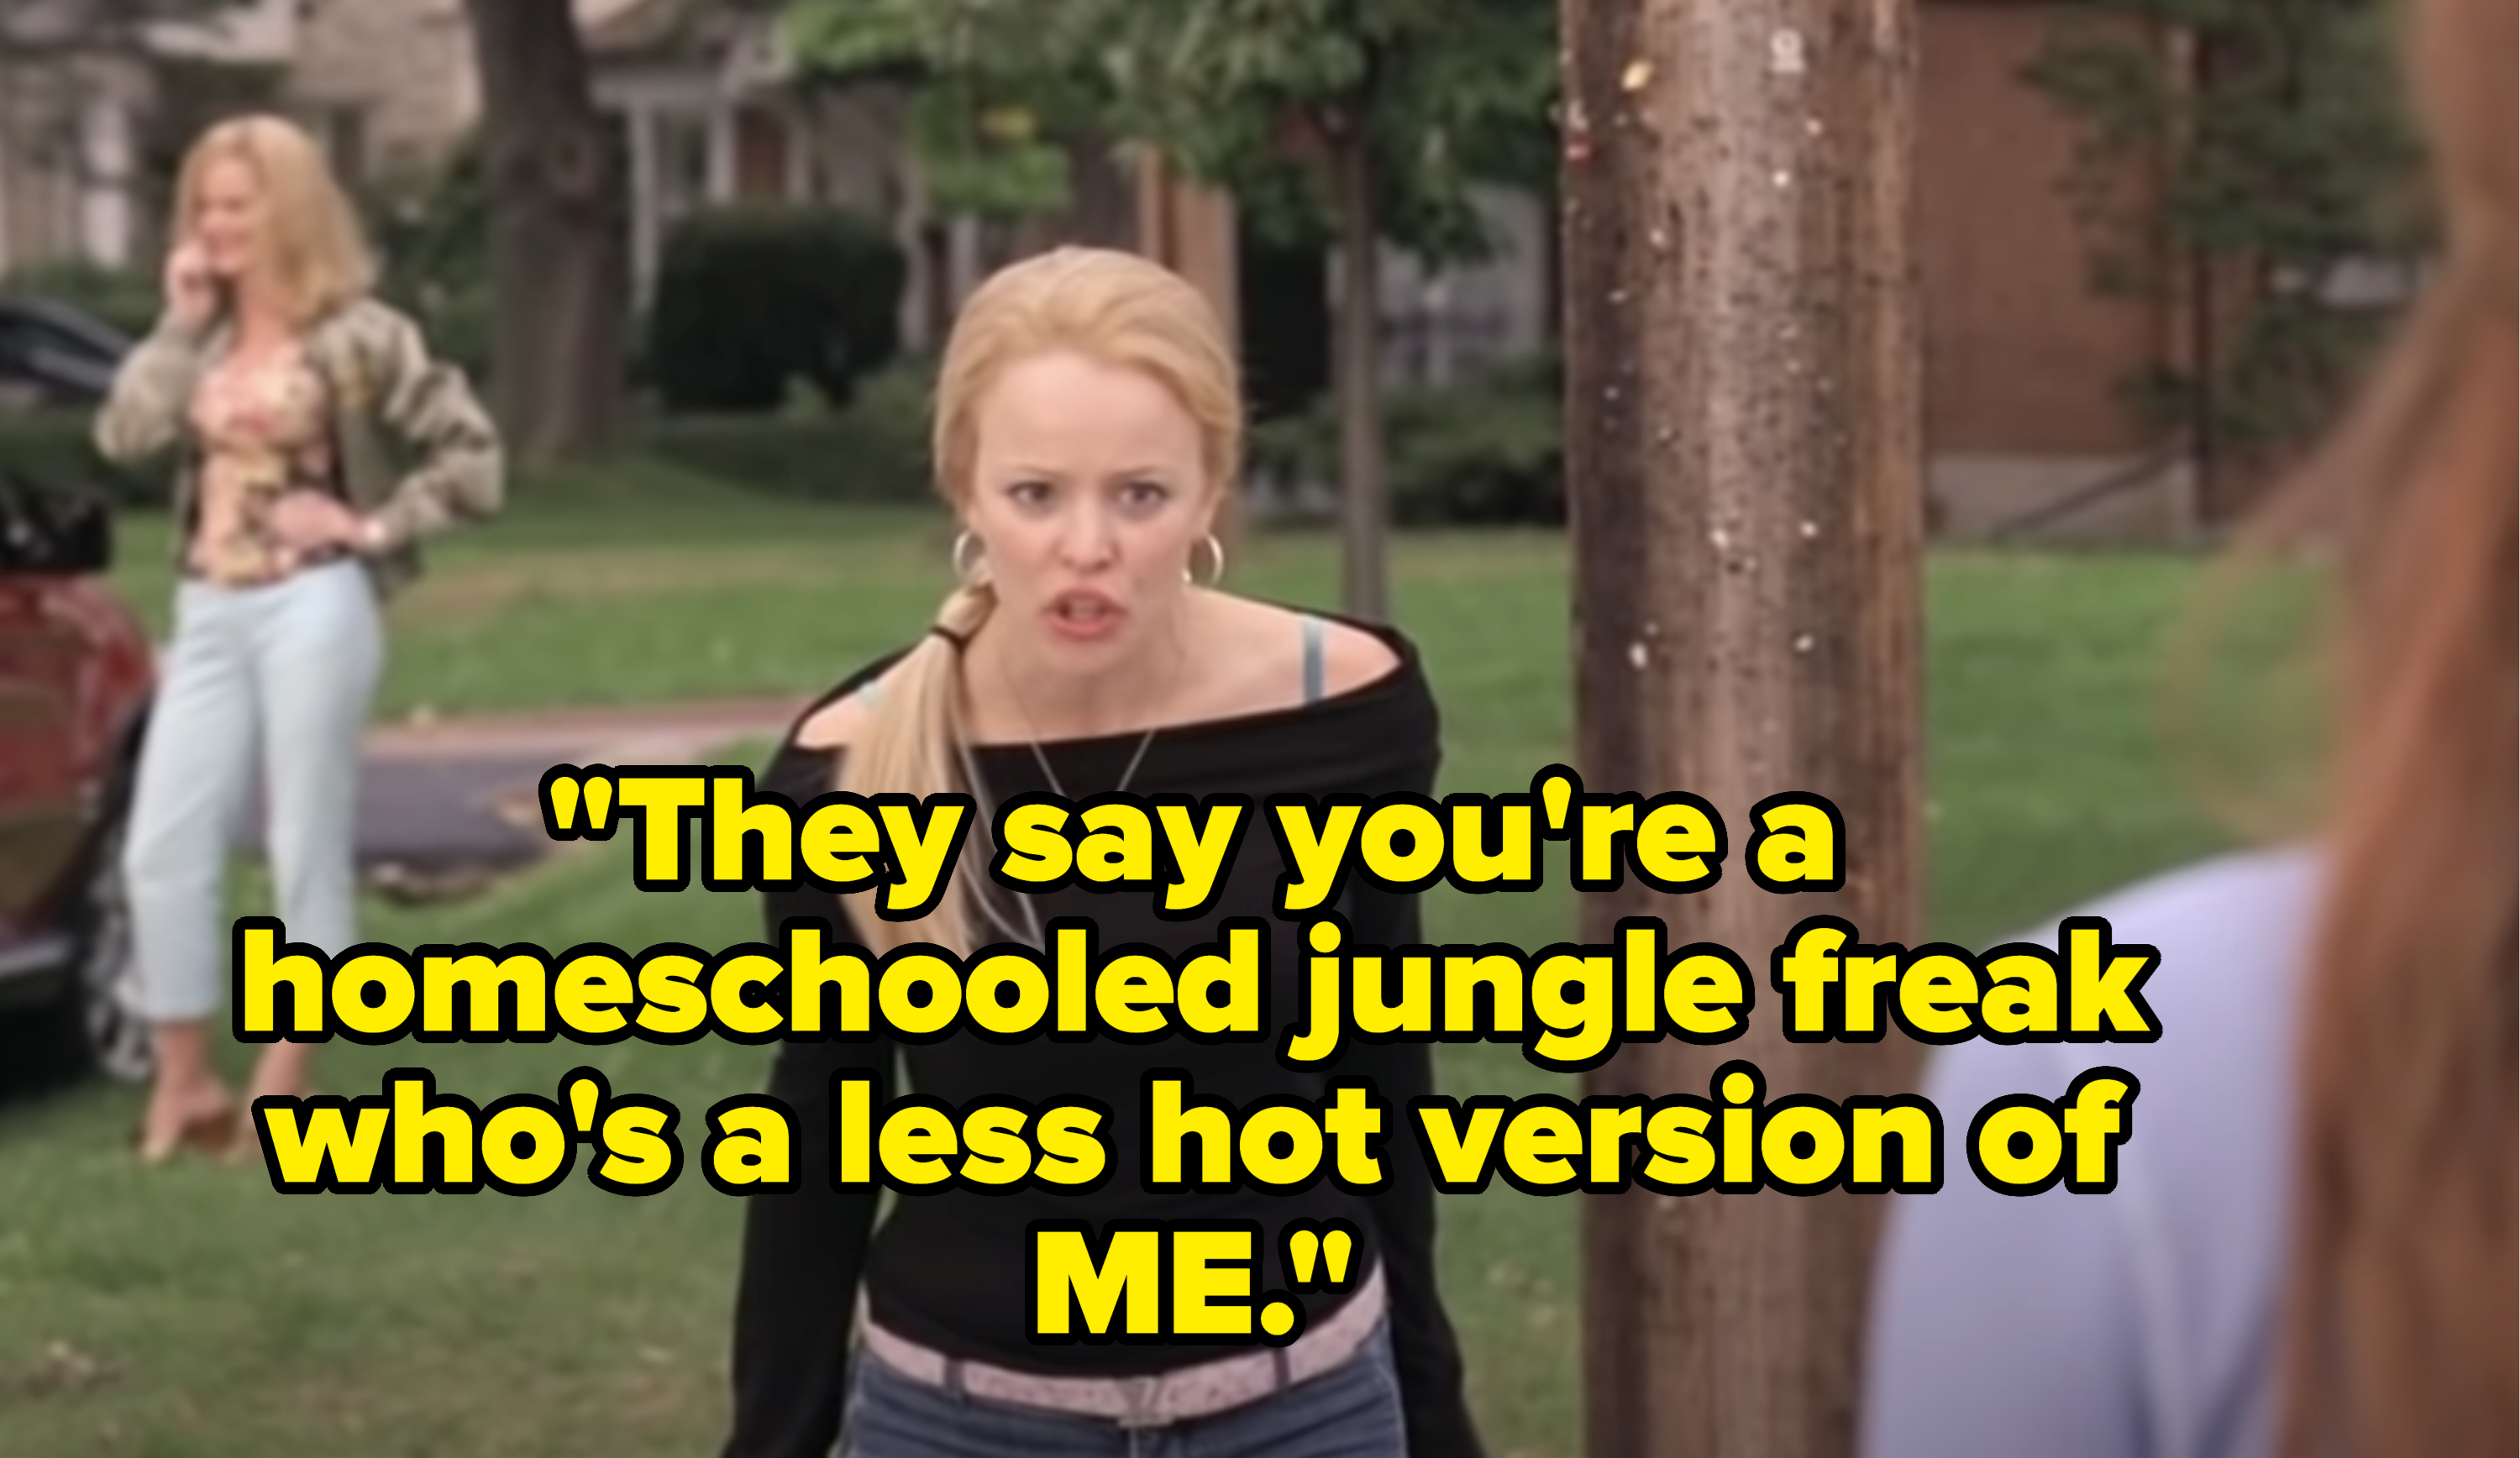 In the middle of a street, Regina George faces Cady Heron. Her mother stands behind her in the grass, on the phone. Text reads &quot;They say you&#x27;re a homeschooled jungle freak who&#x27;s a less hot version of ME.&quot;